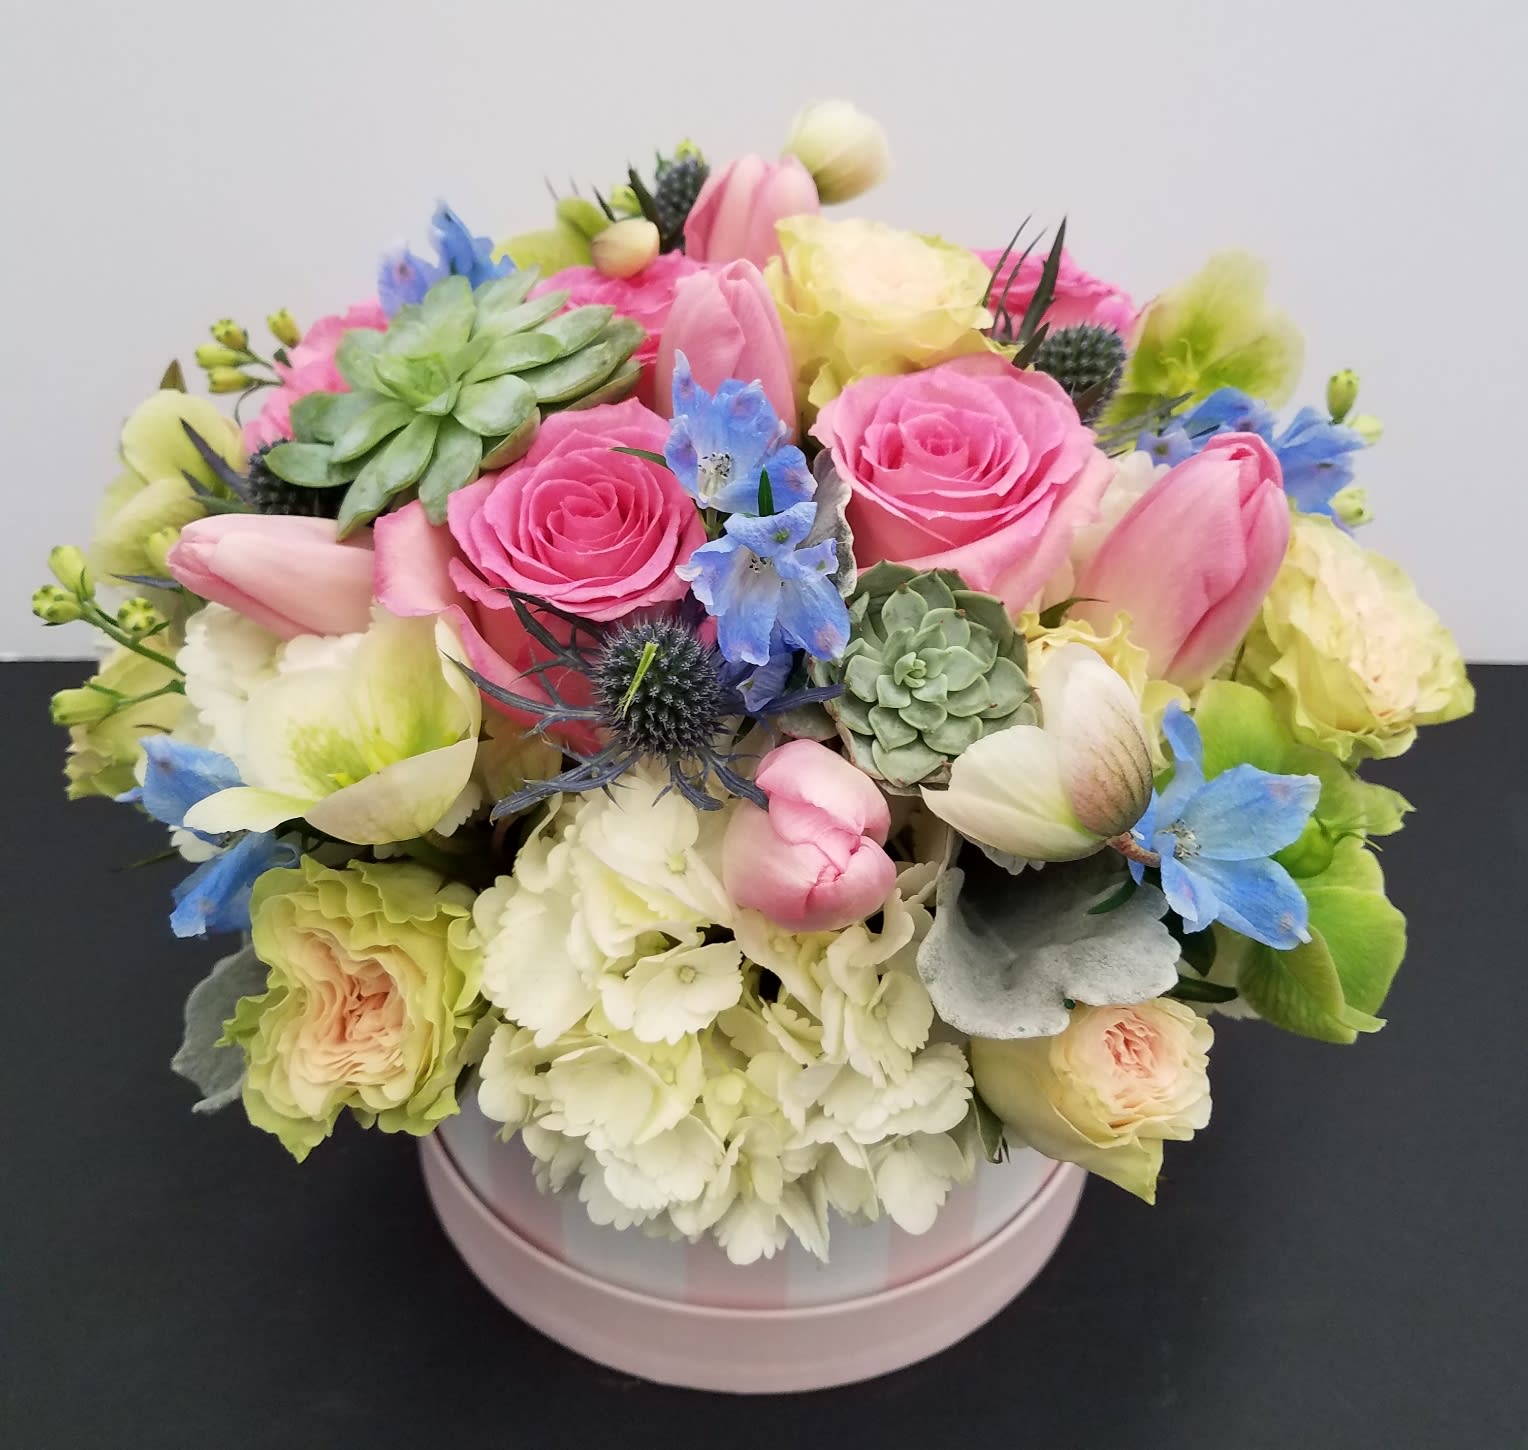 Newton Florist - Flower Delivery by Blooms of Elegance